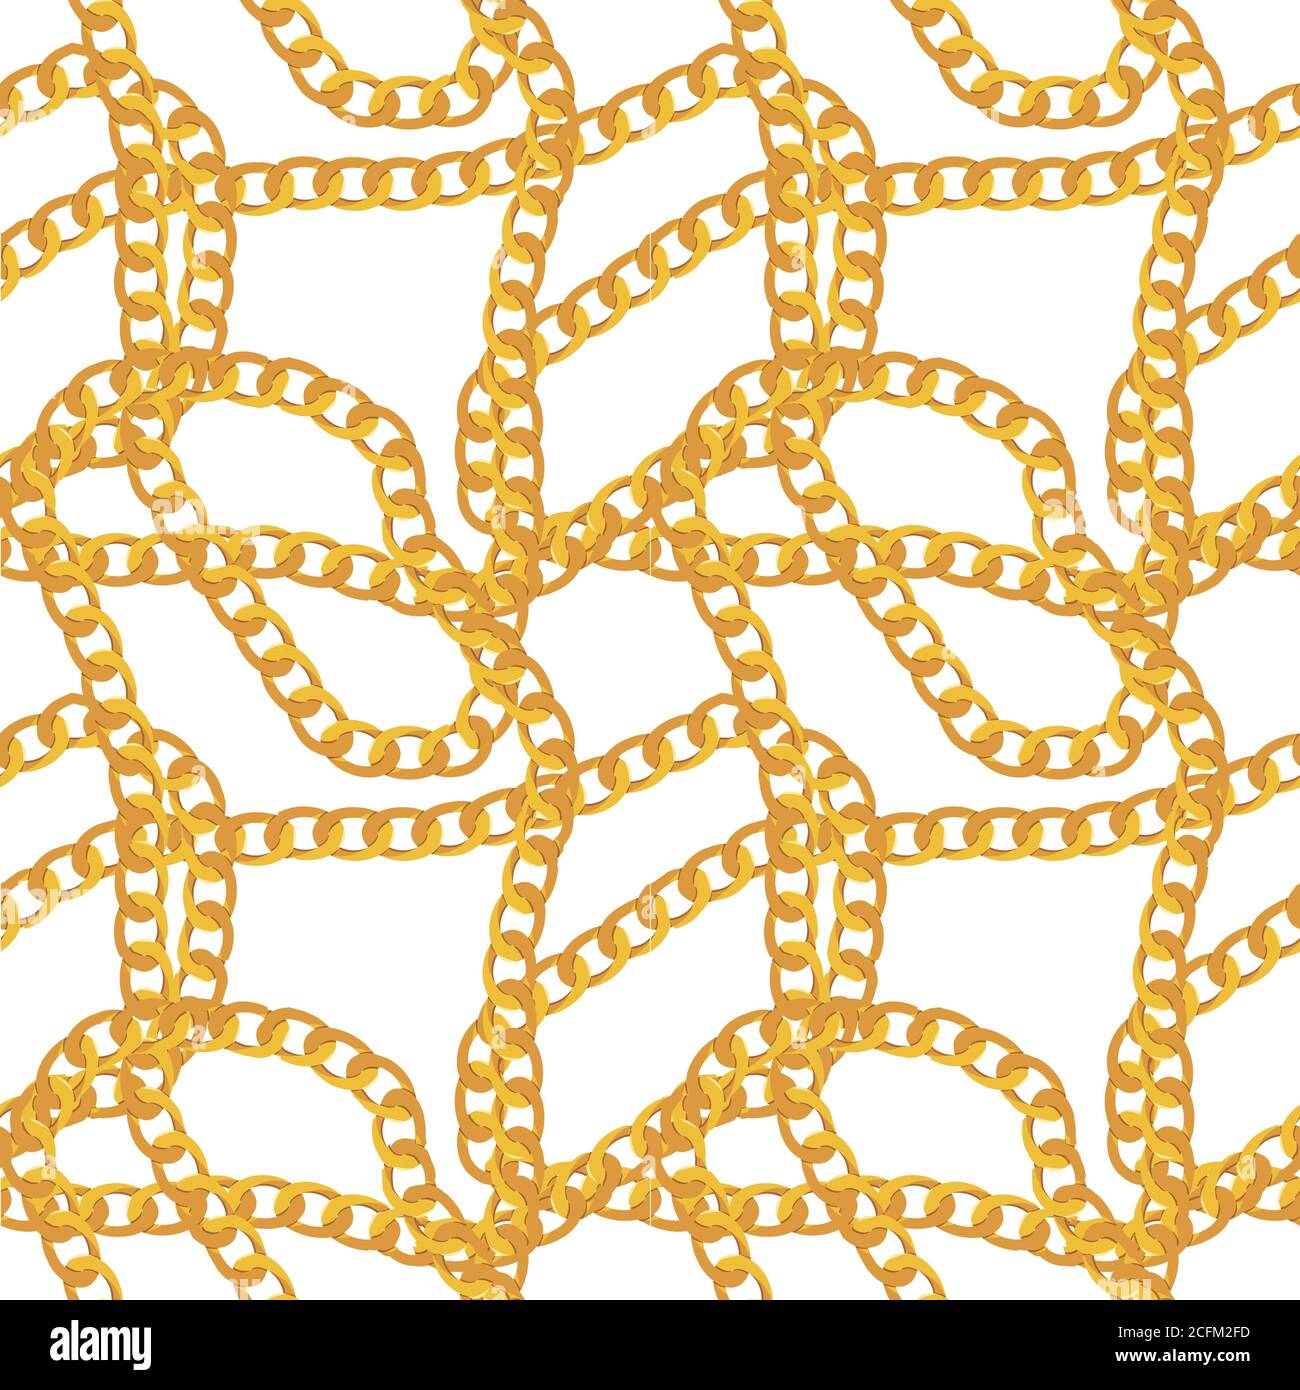 Abstract Chain Seamless Pattern Background. Vector Illustration Stock Vector